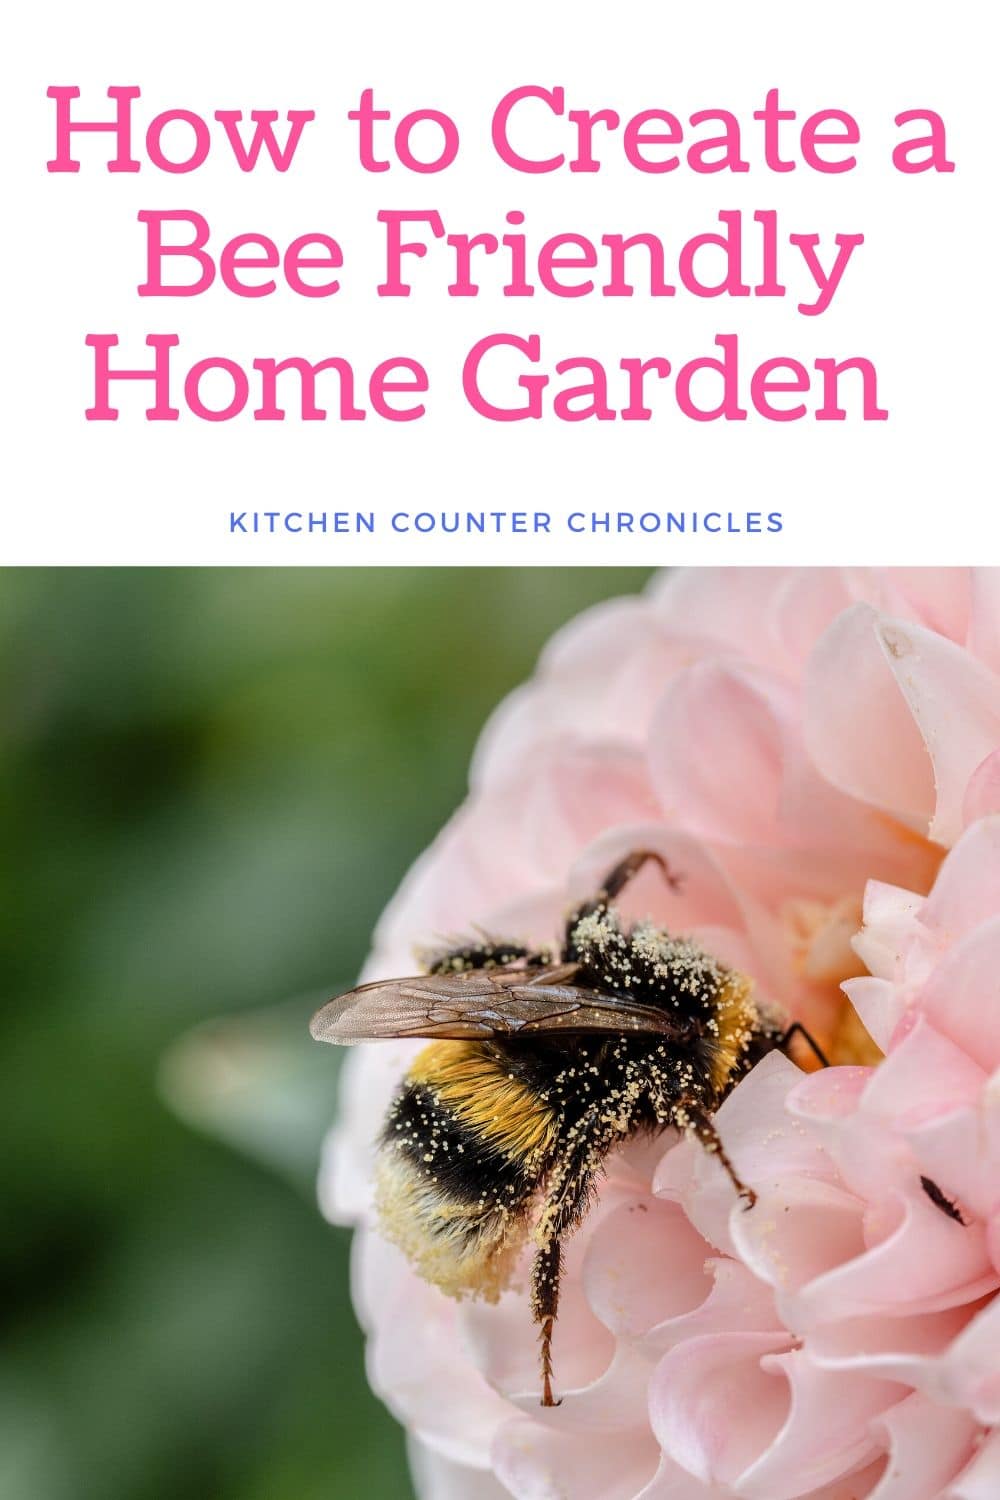 https://www.kitchencounterchronicle.com/wp-content/uploads/2019/04/How-to-Make-a-Bee-Friendly-Garden-at-Home.jpg